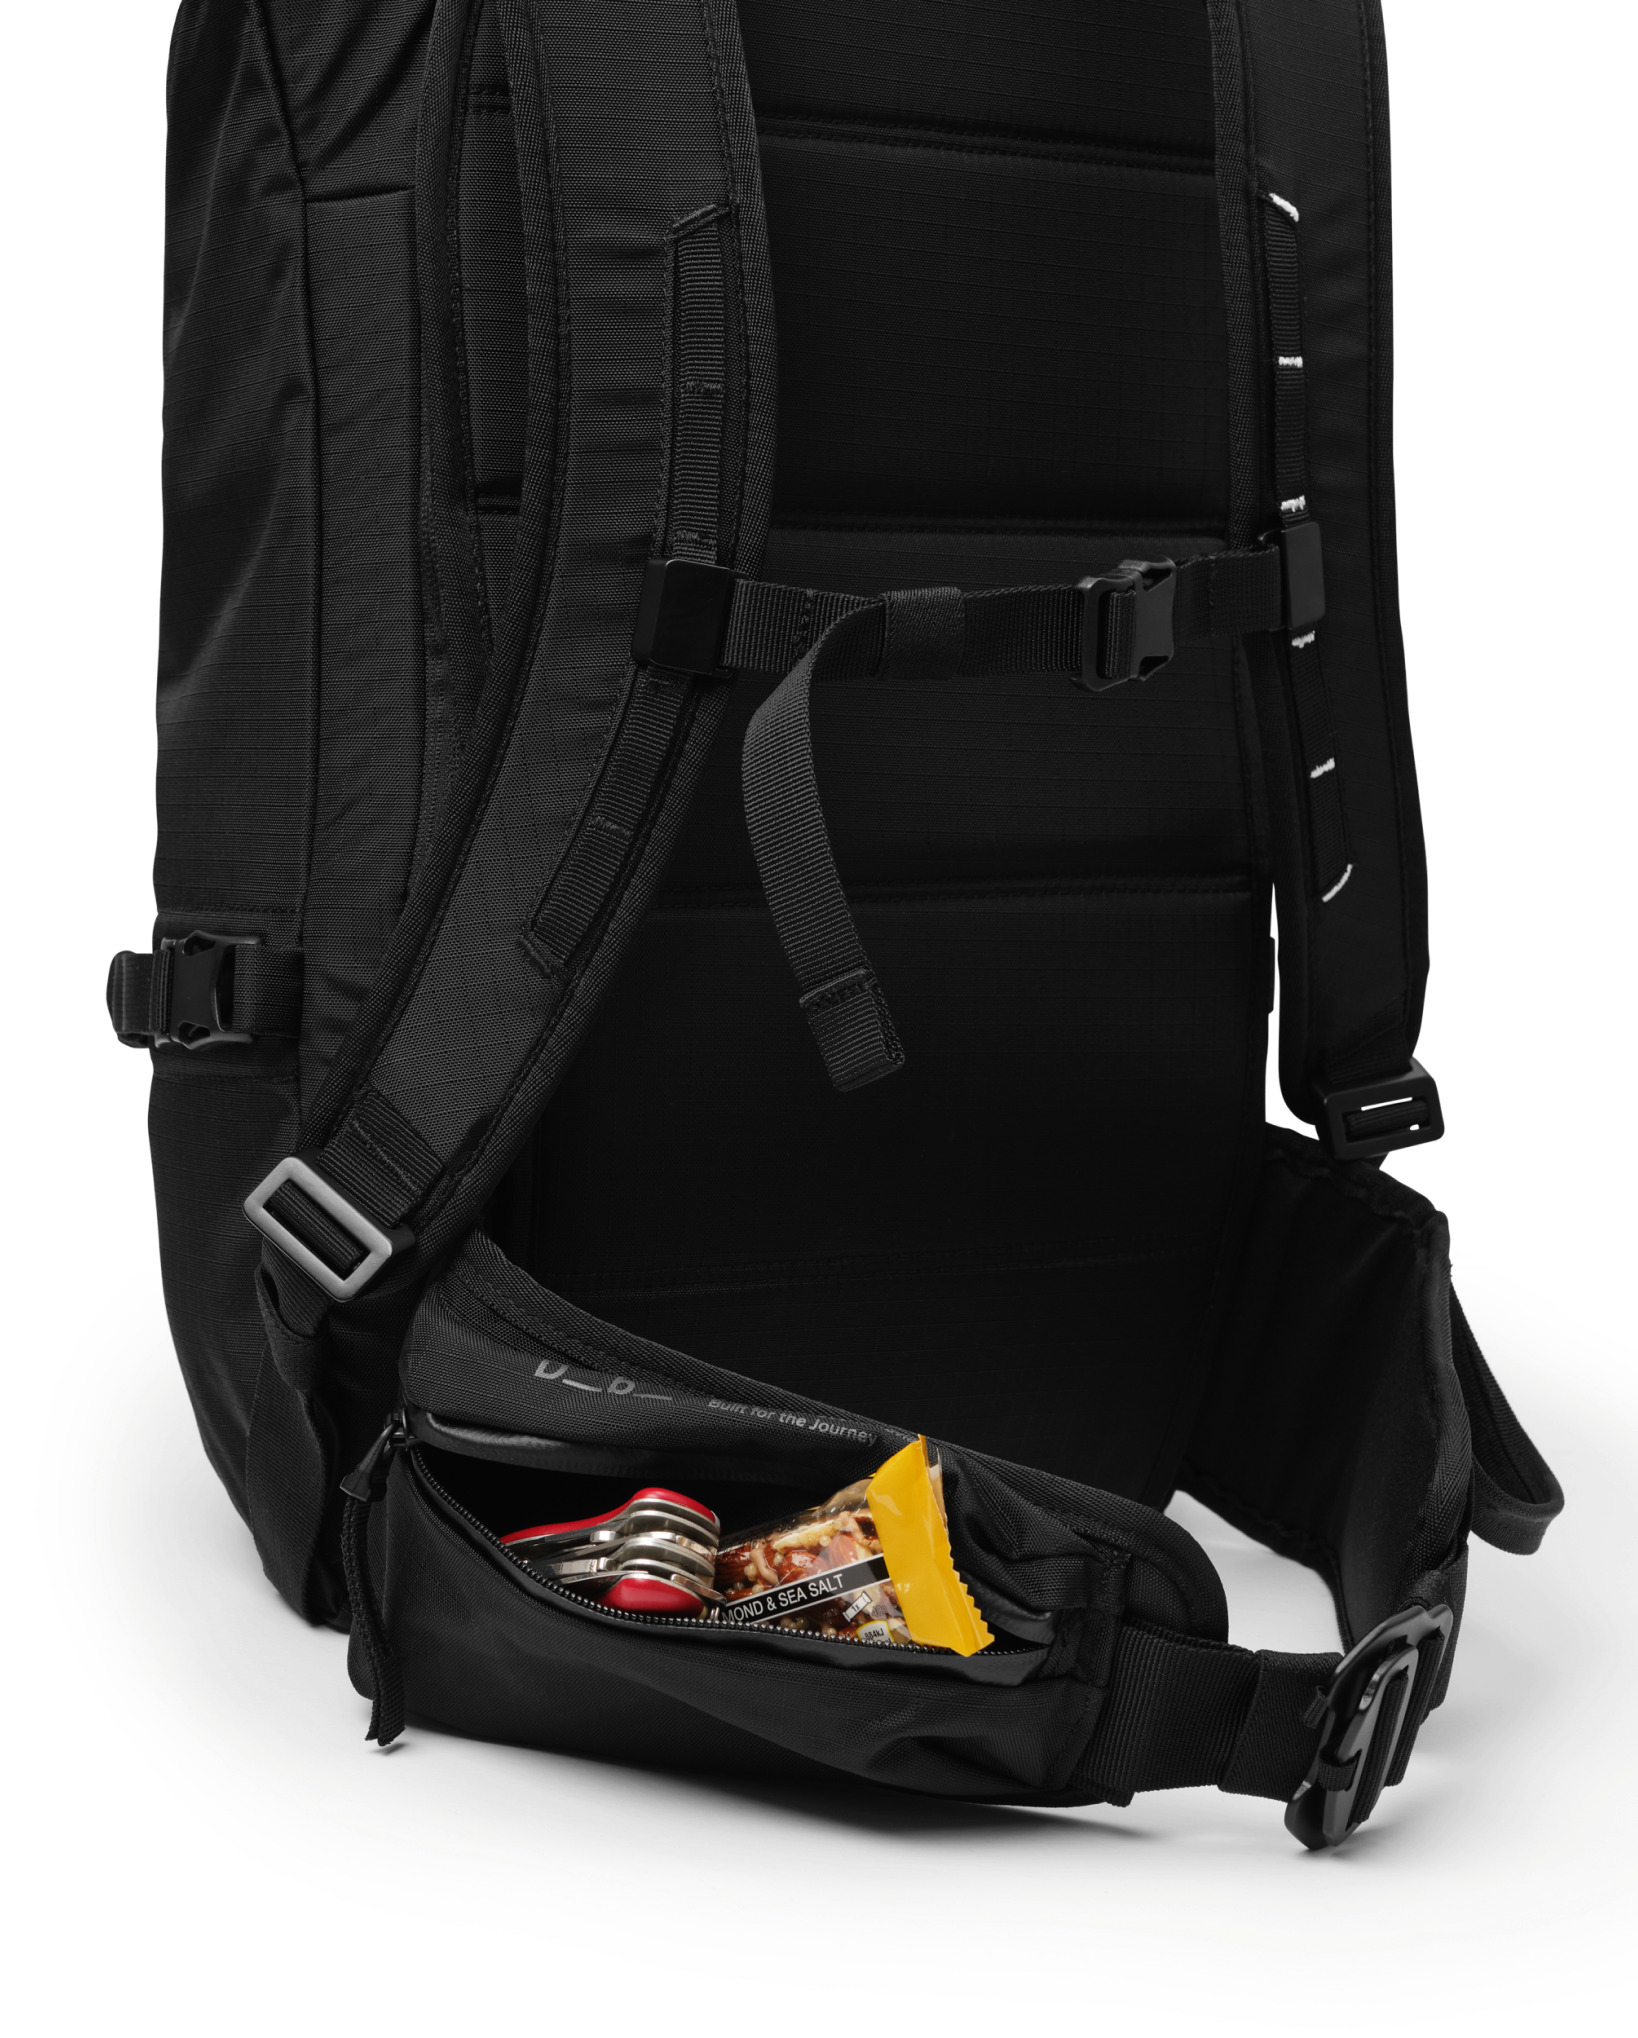 Snow Pro Backpack 32L Black Out